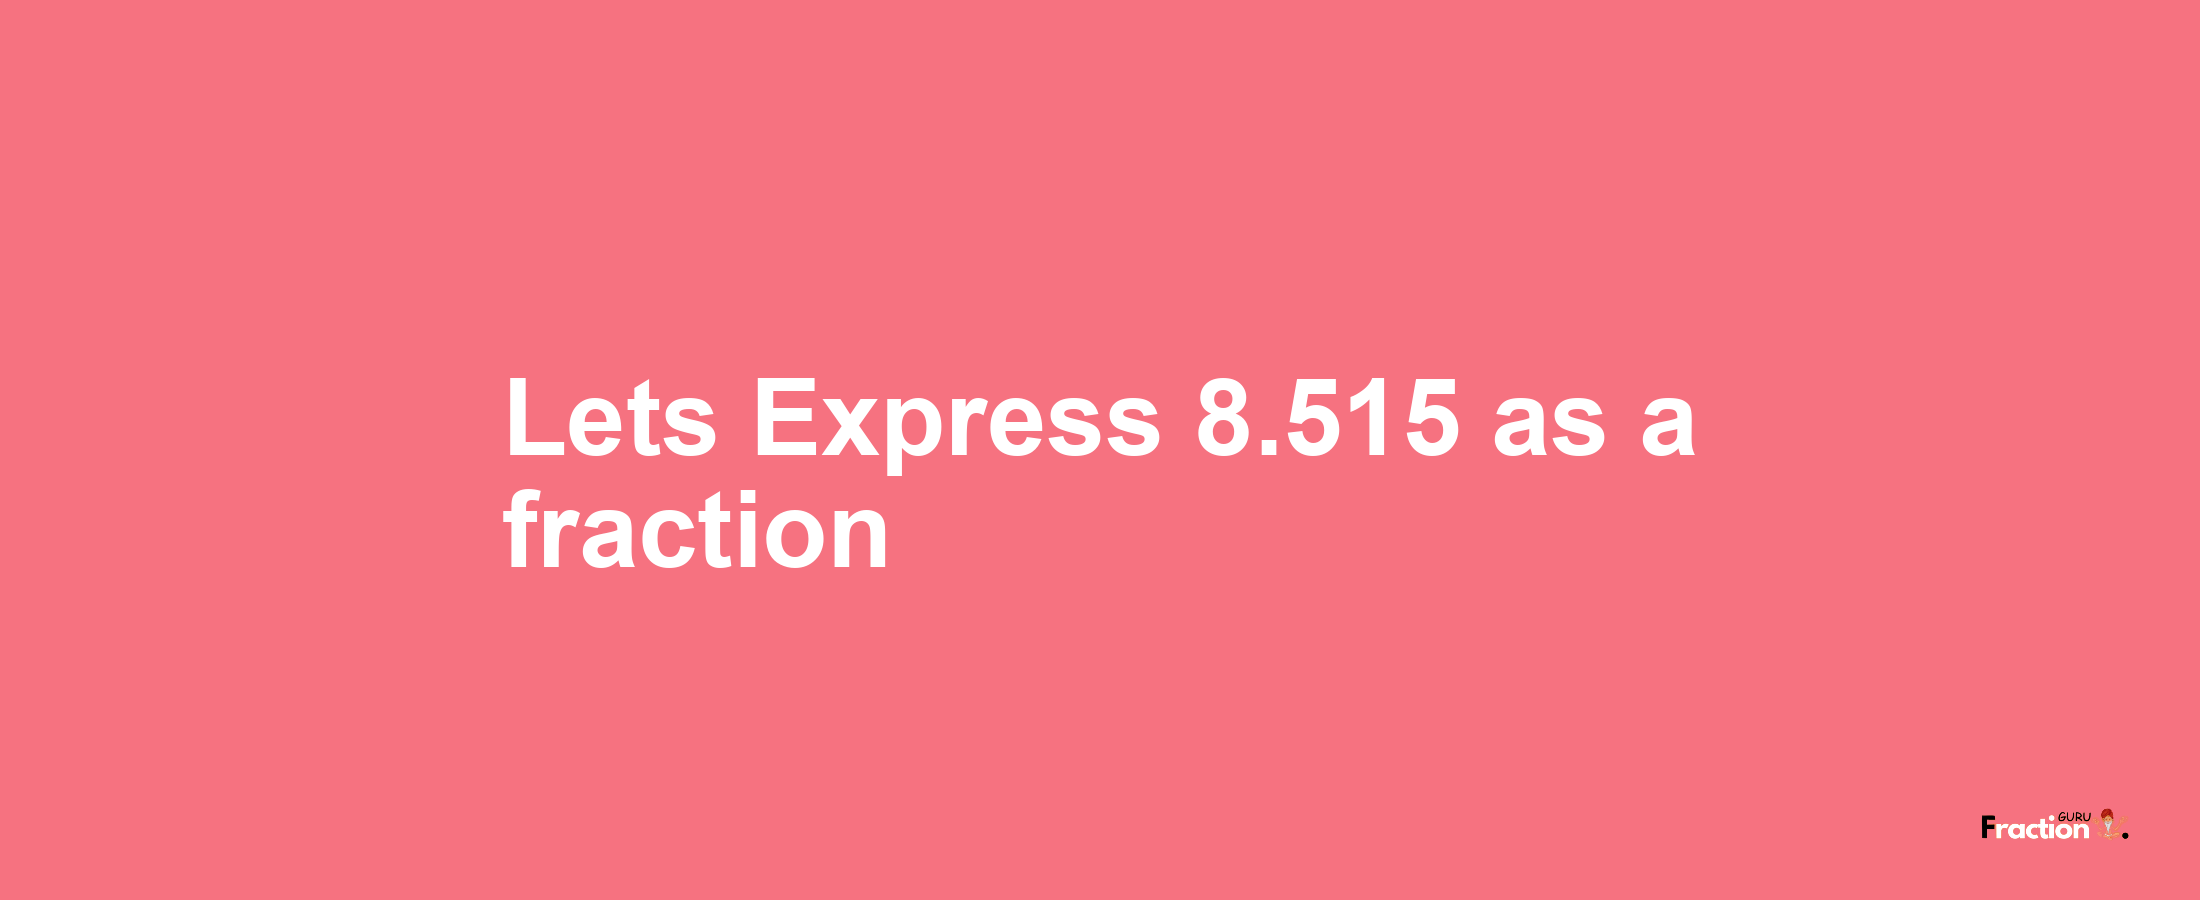 Lets Express 8.515 as afraction